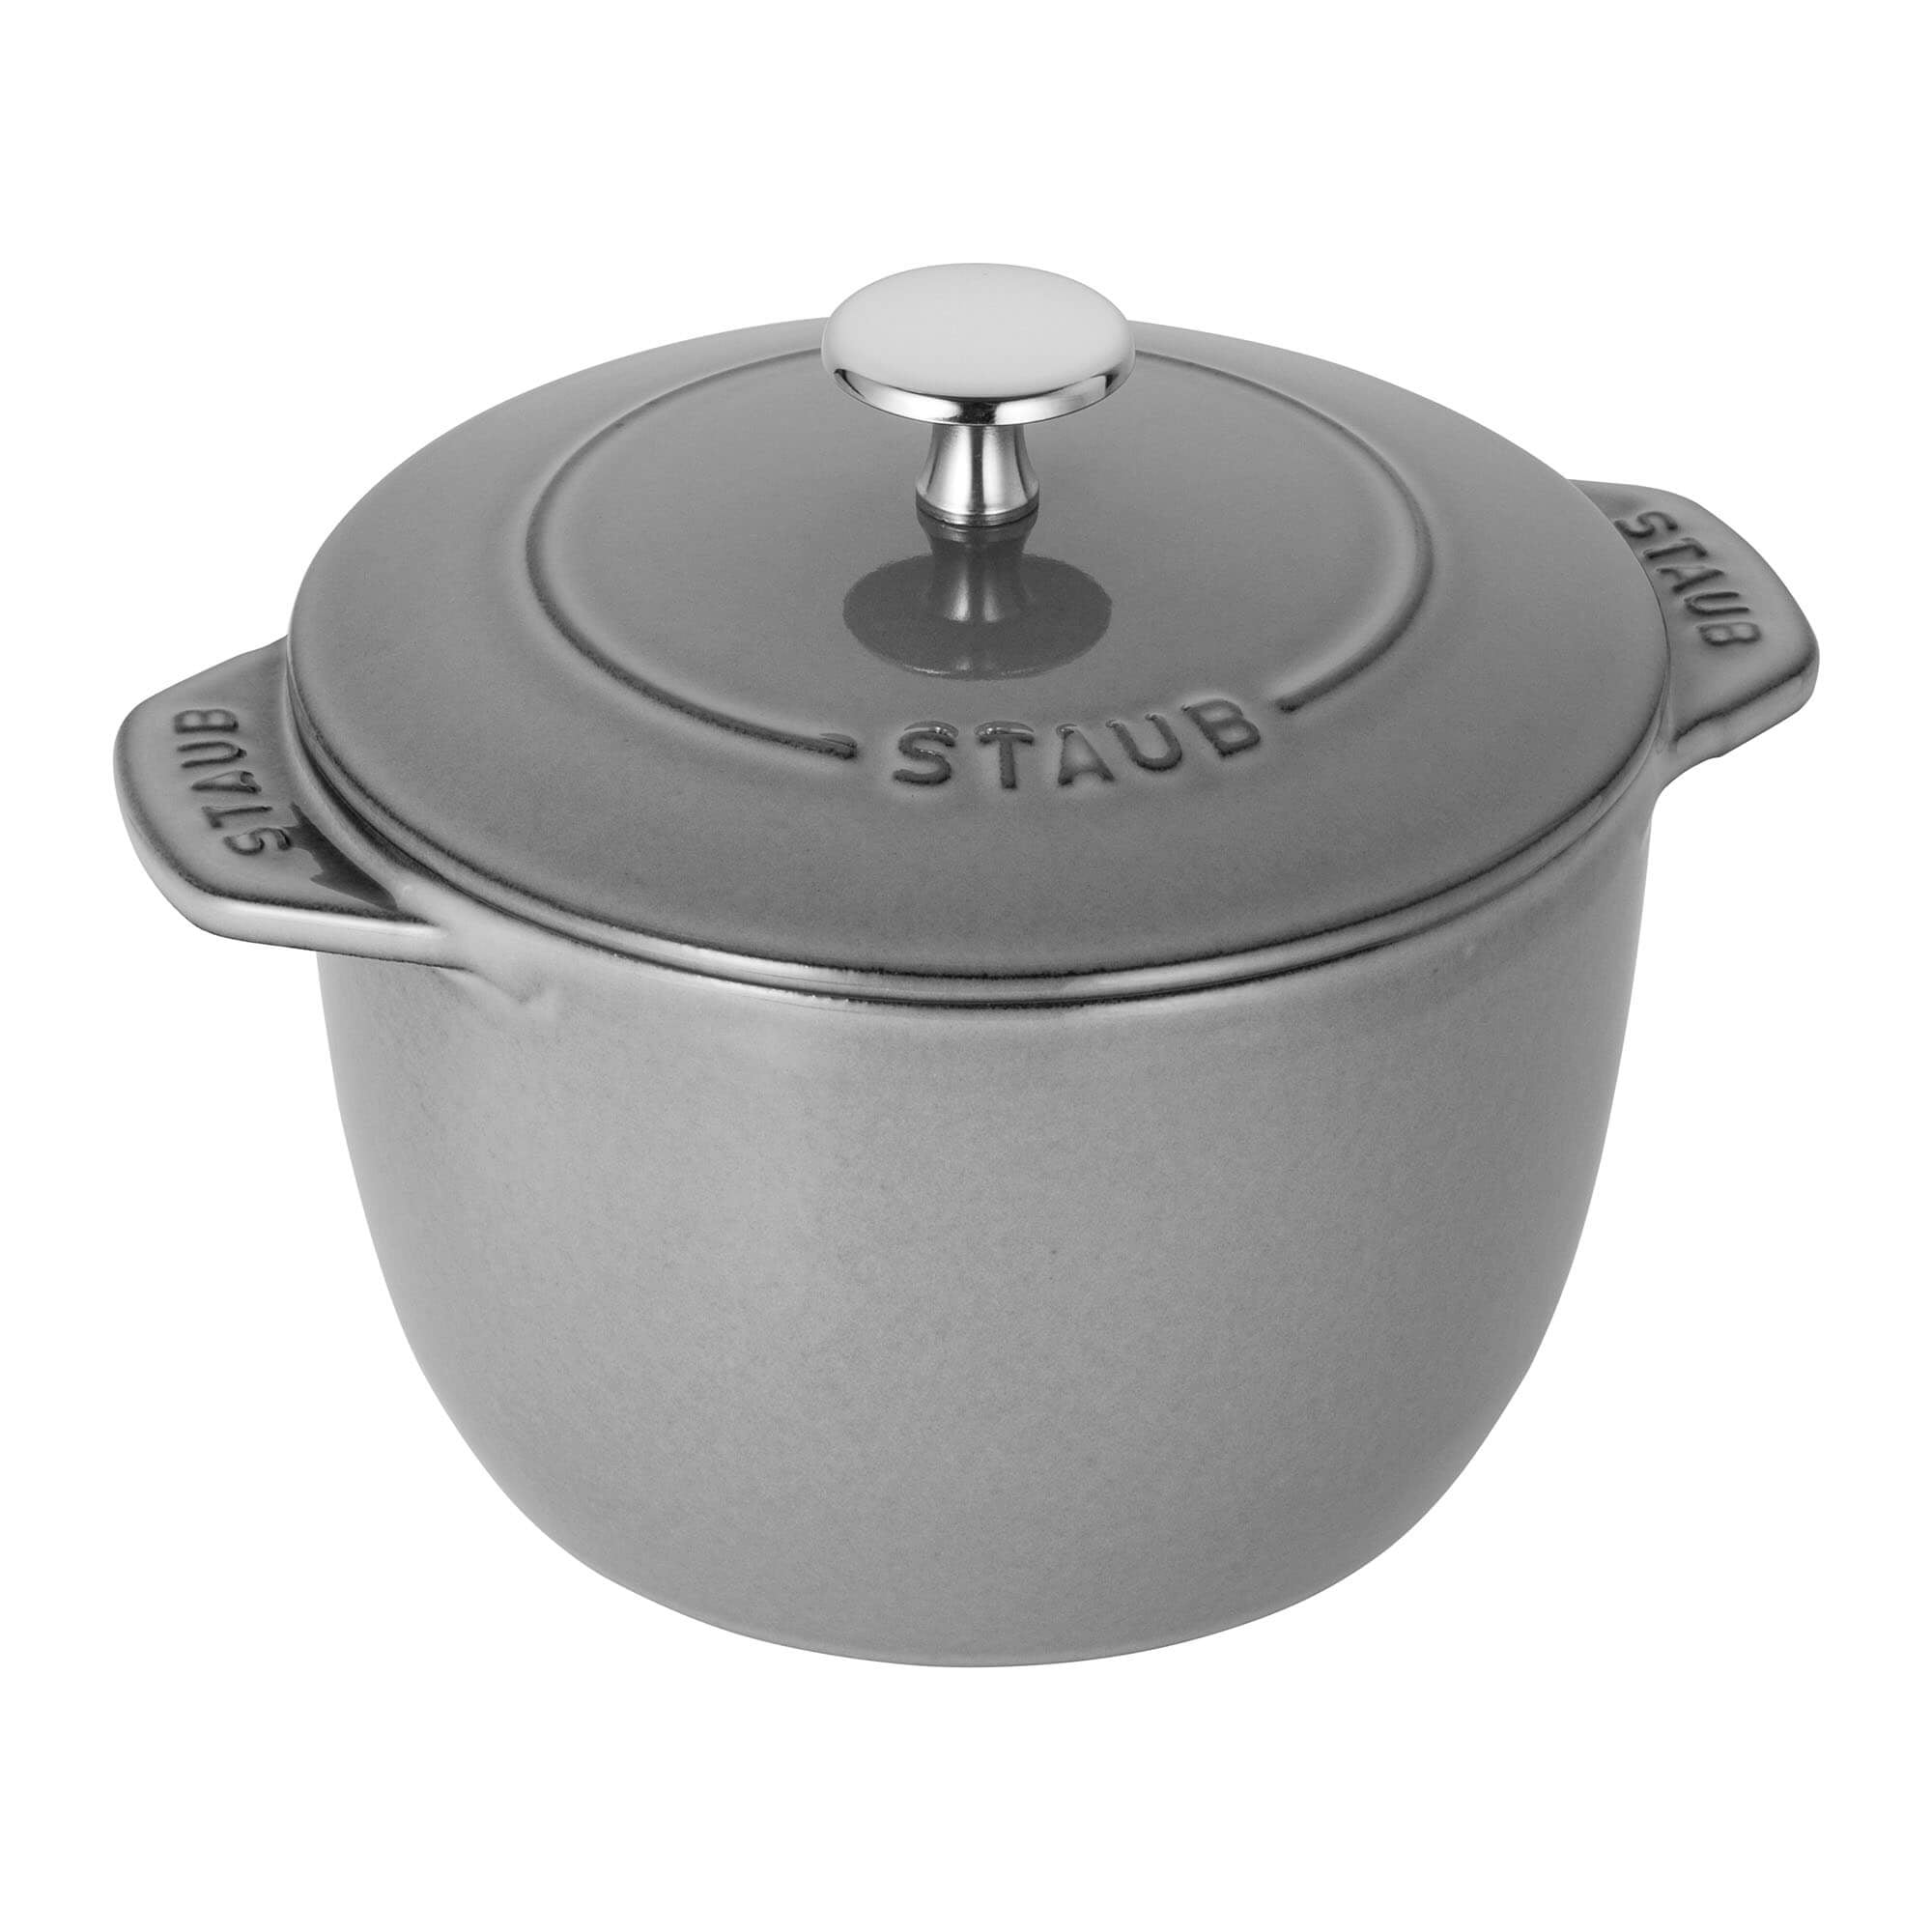 Food52 x Staub Petite French Oven Cast Iron Rice Cooker, 1.5QT